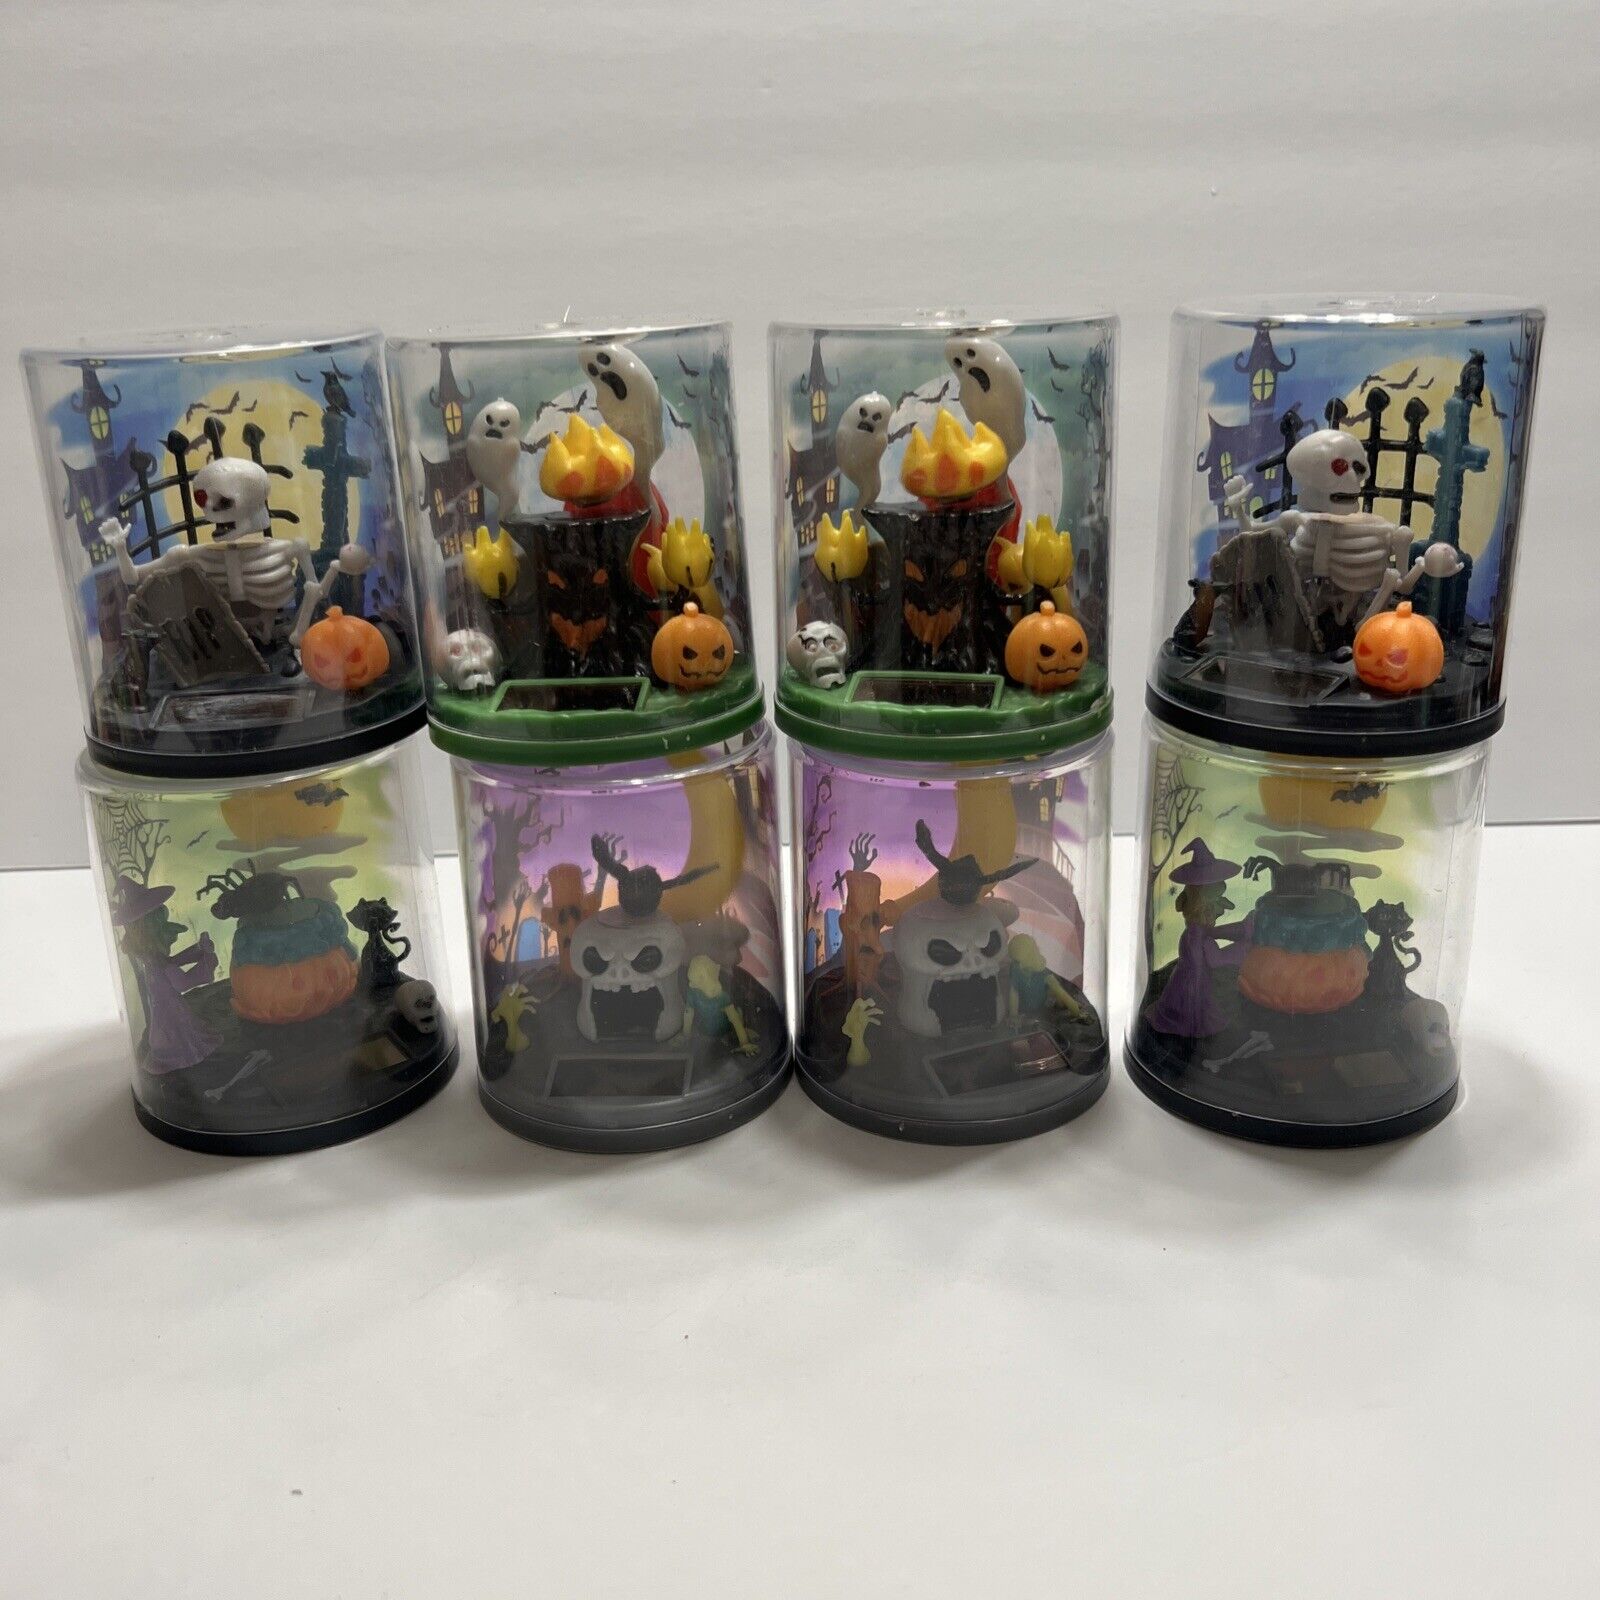 Lot of 8 Greenbriar Solar Powered Dancing Toys Halloween Skeletons,ghosts,spider